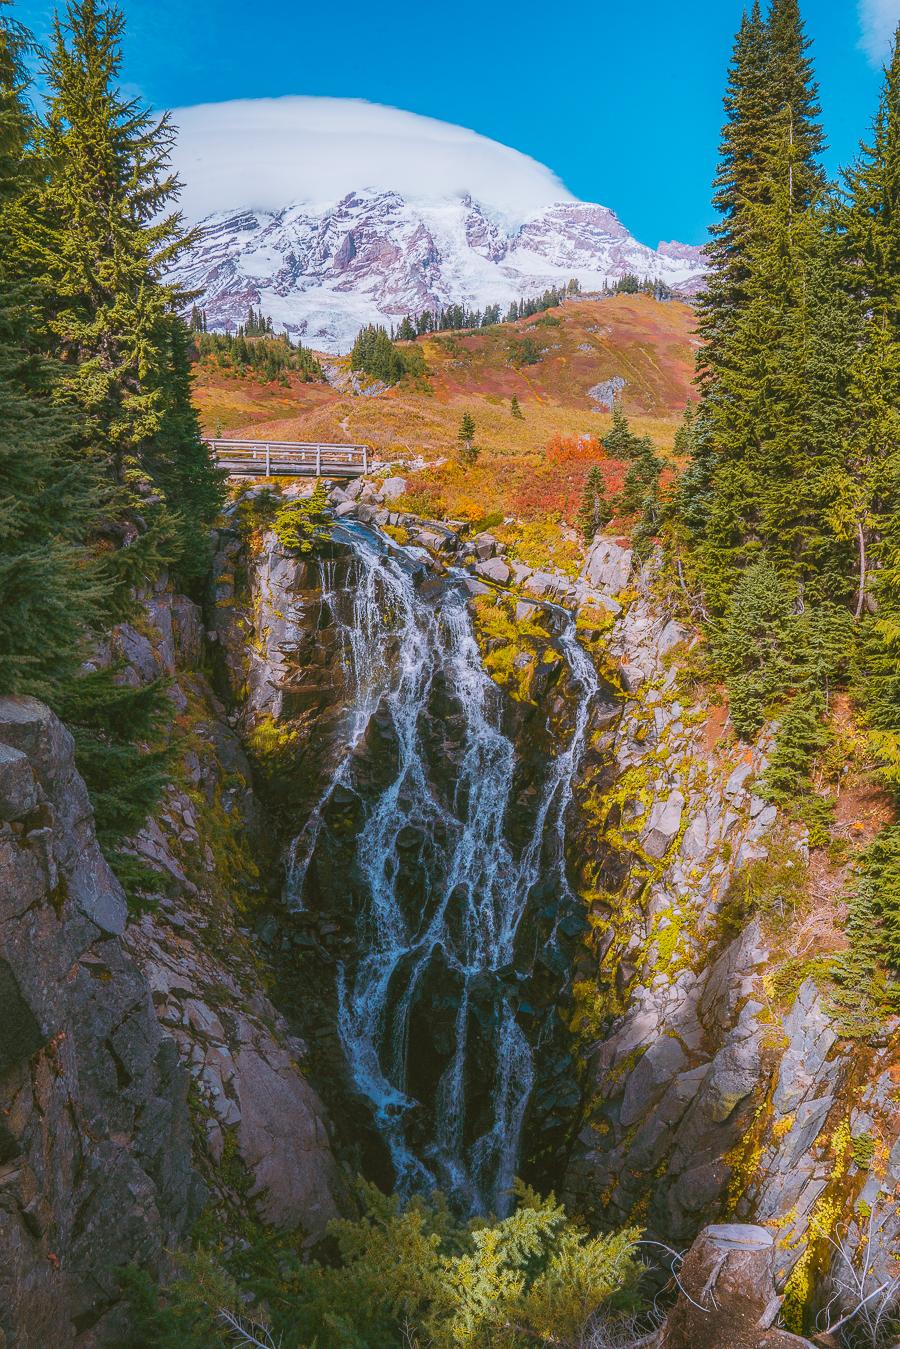 Where To Stay In Mt Rainier National Park